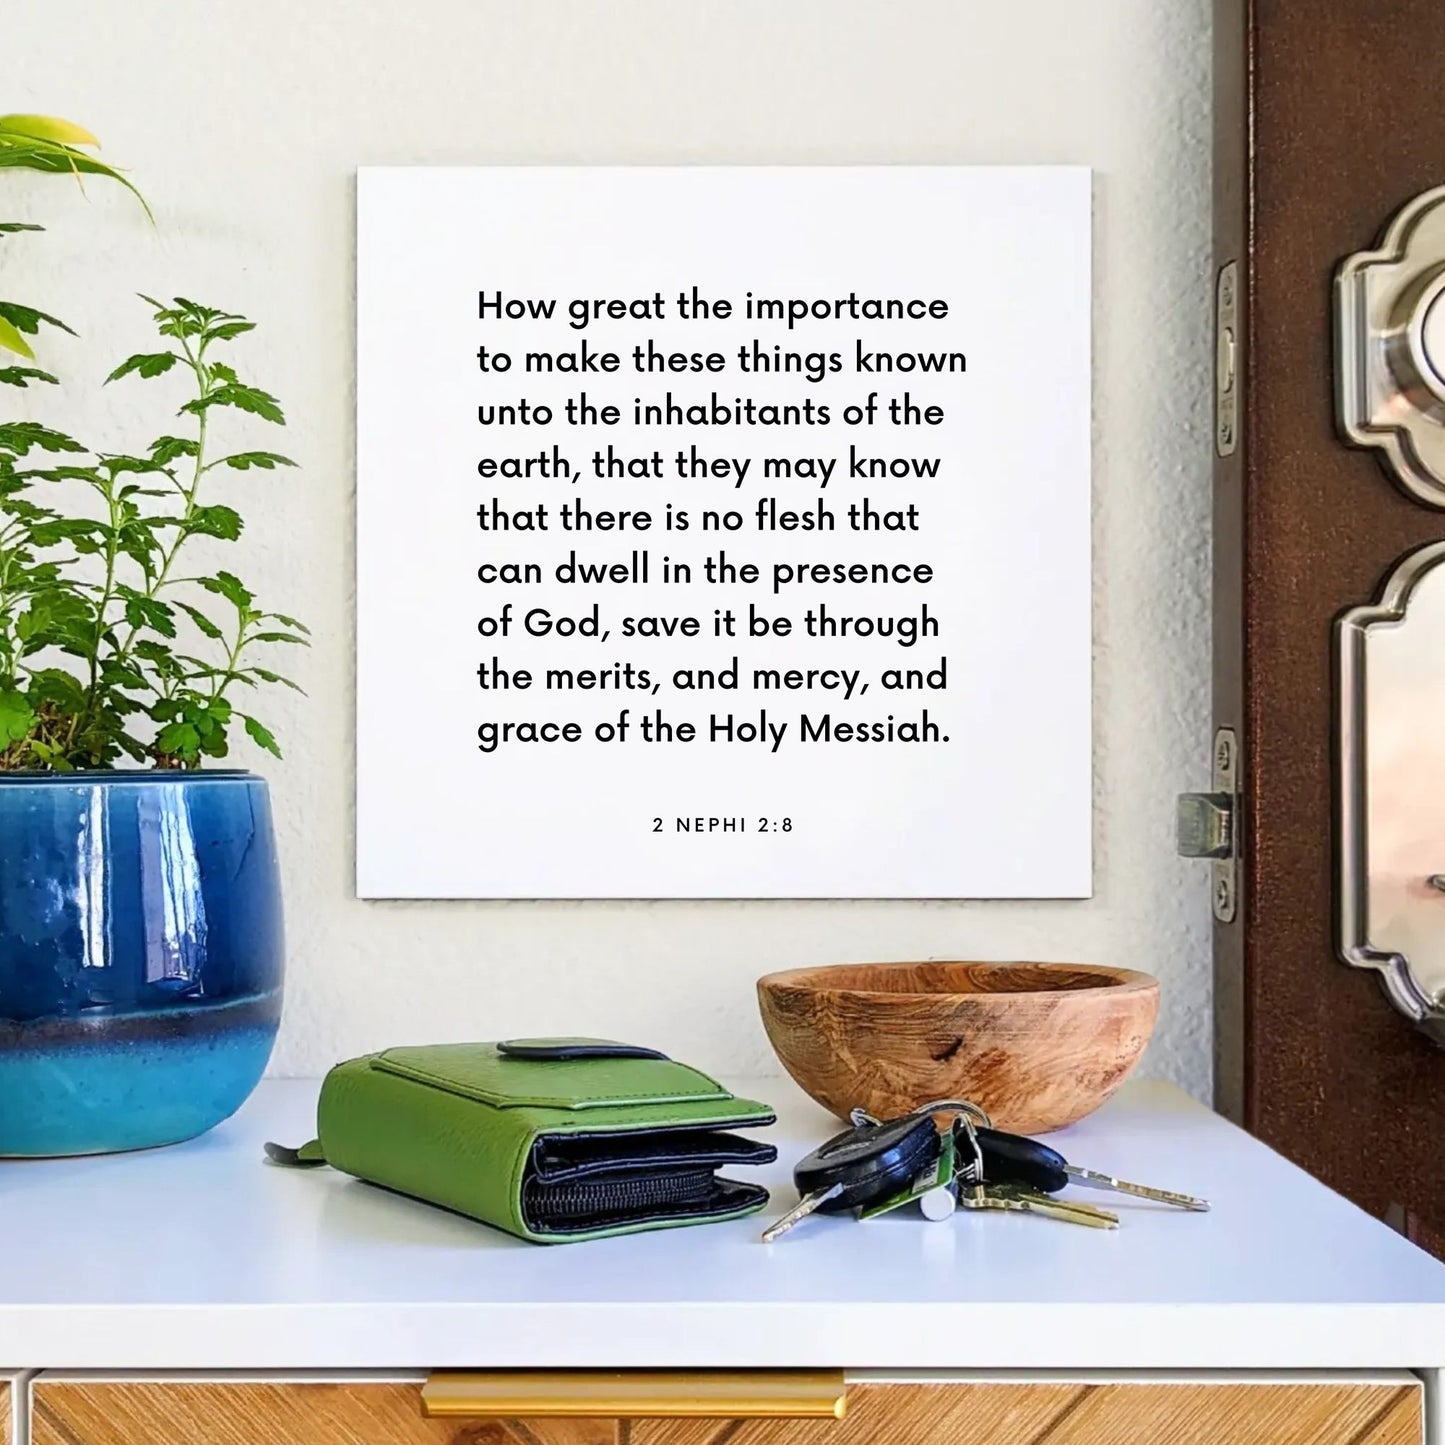 Entryway mouting of the scripture tile for 2 Nephi 2:8 - "How great the importance to make these things known"